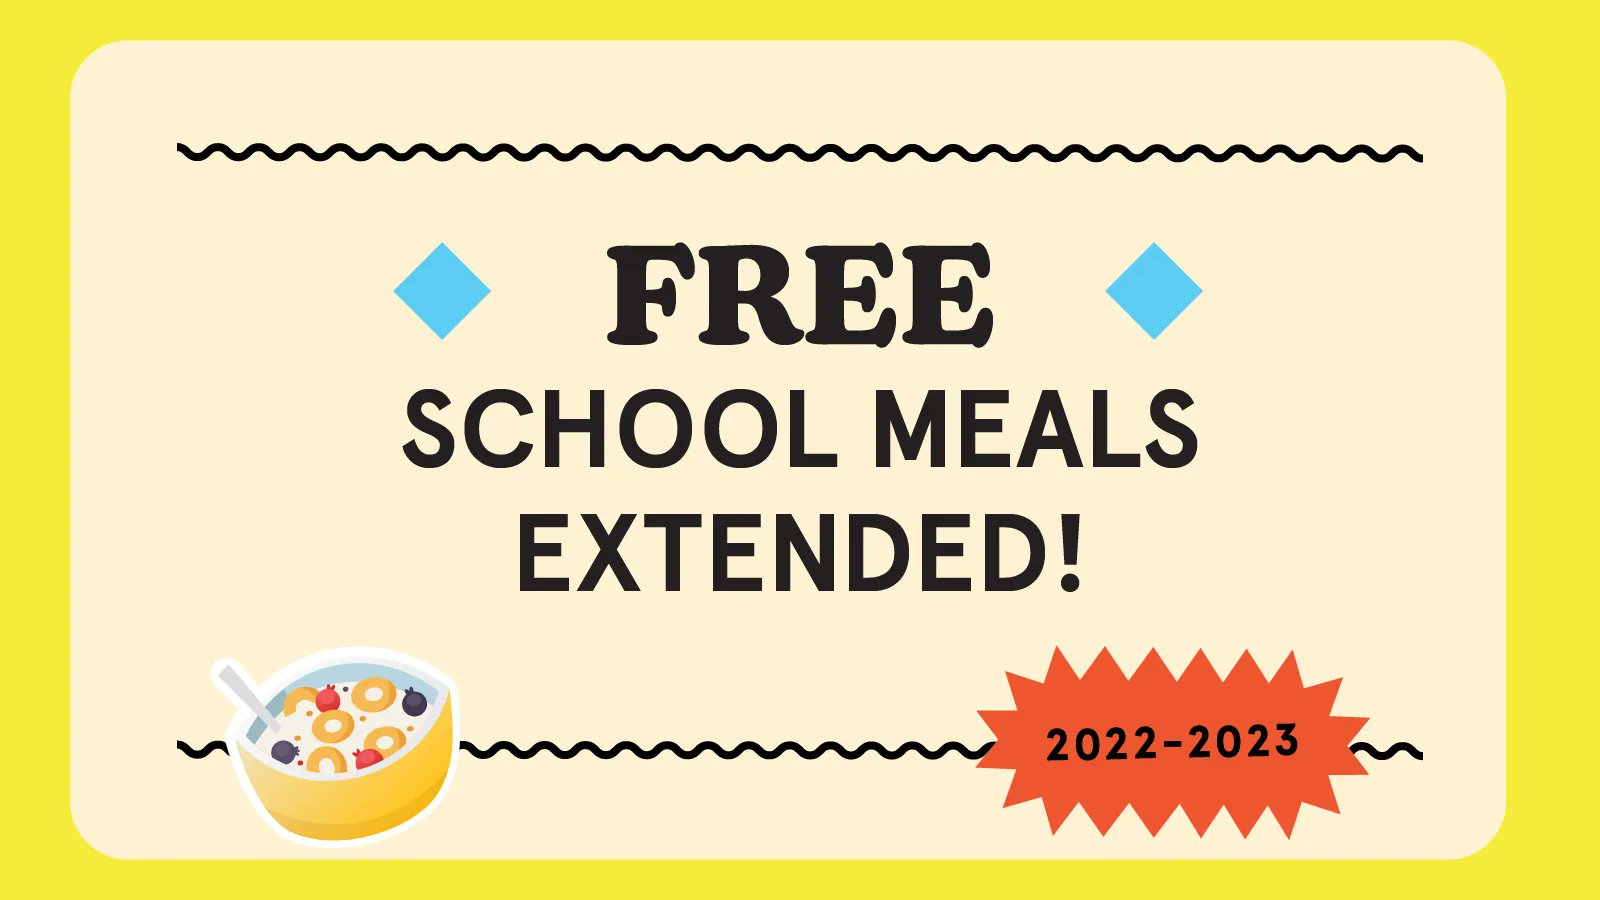 Free school meals extended through the 2022-2023 school year!